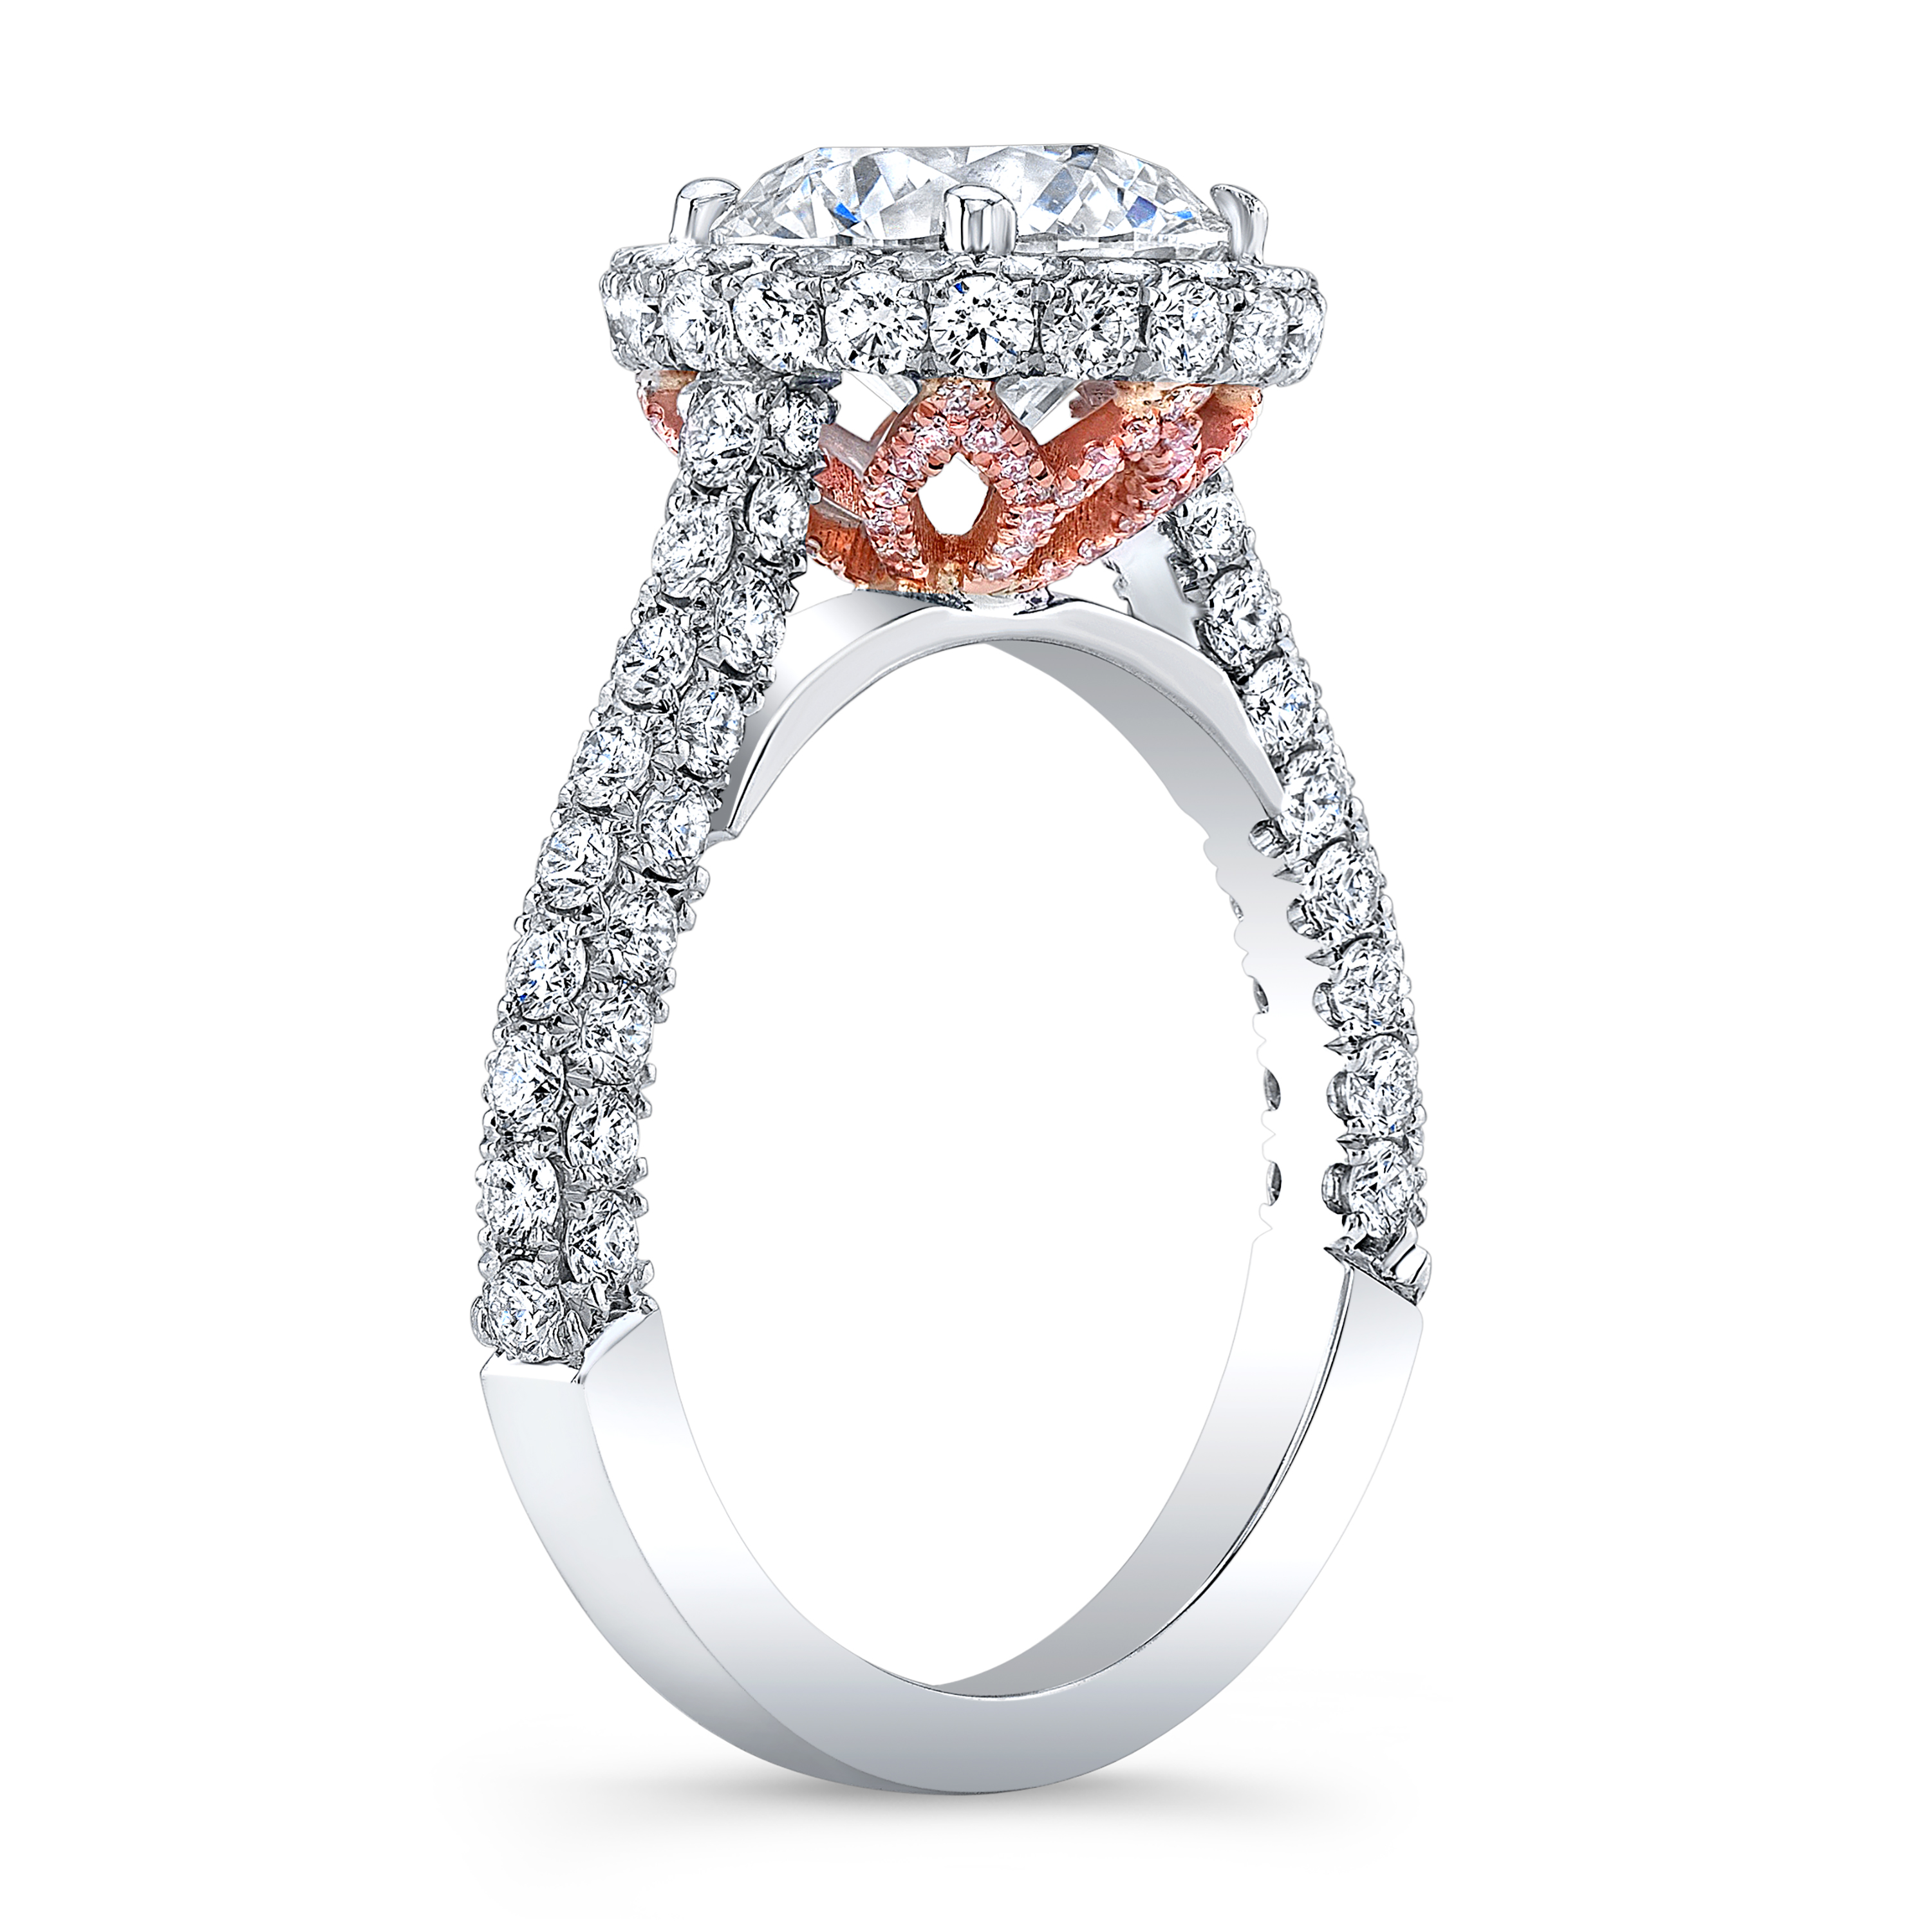 Halo 3 Sided Pave Engagement Ring  With Pink Diamonds